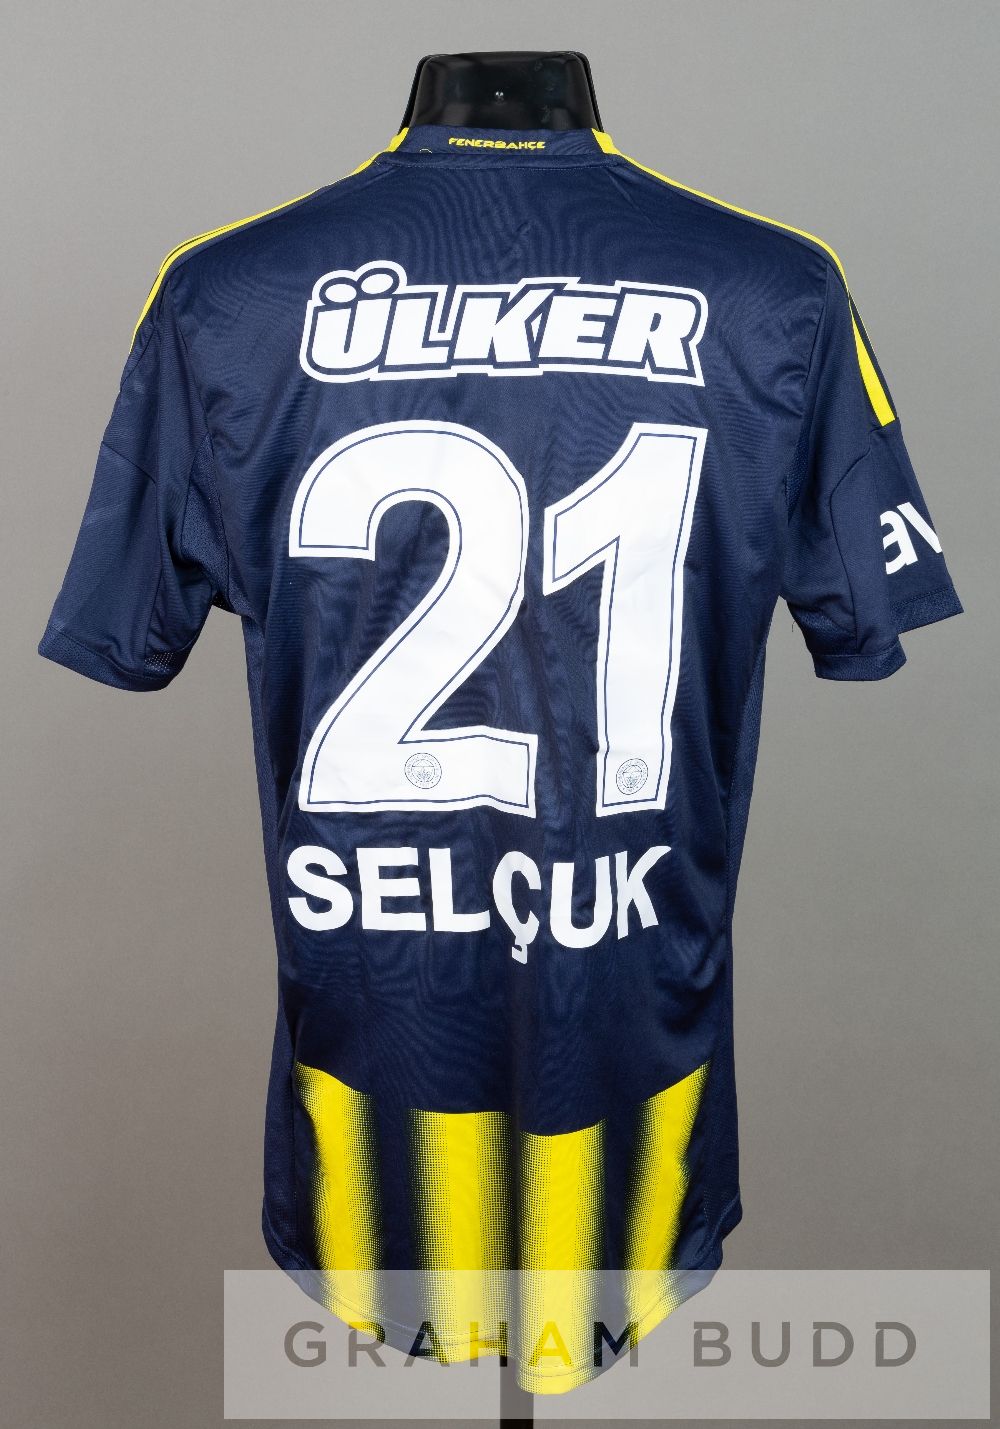 Selcuk Sahin navy and yellow Fenerbahce no.21 jersey v Galatasaray in the Turkish Super Cup final, - Image 2 of 2